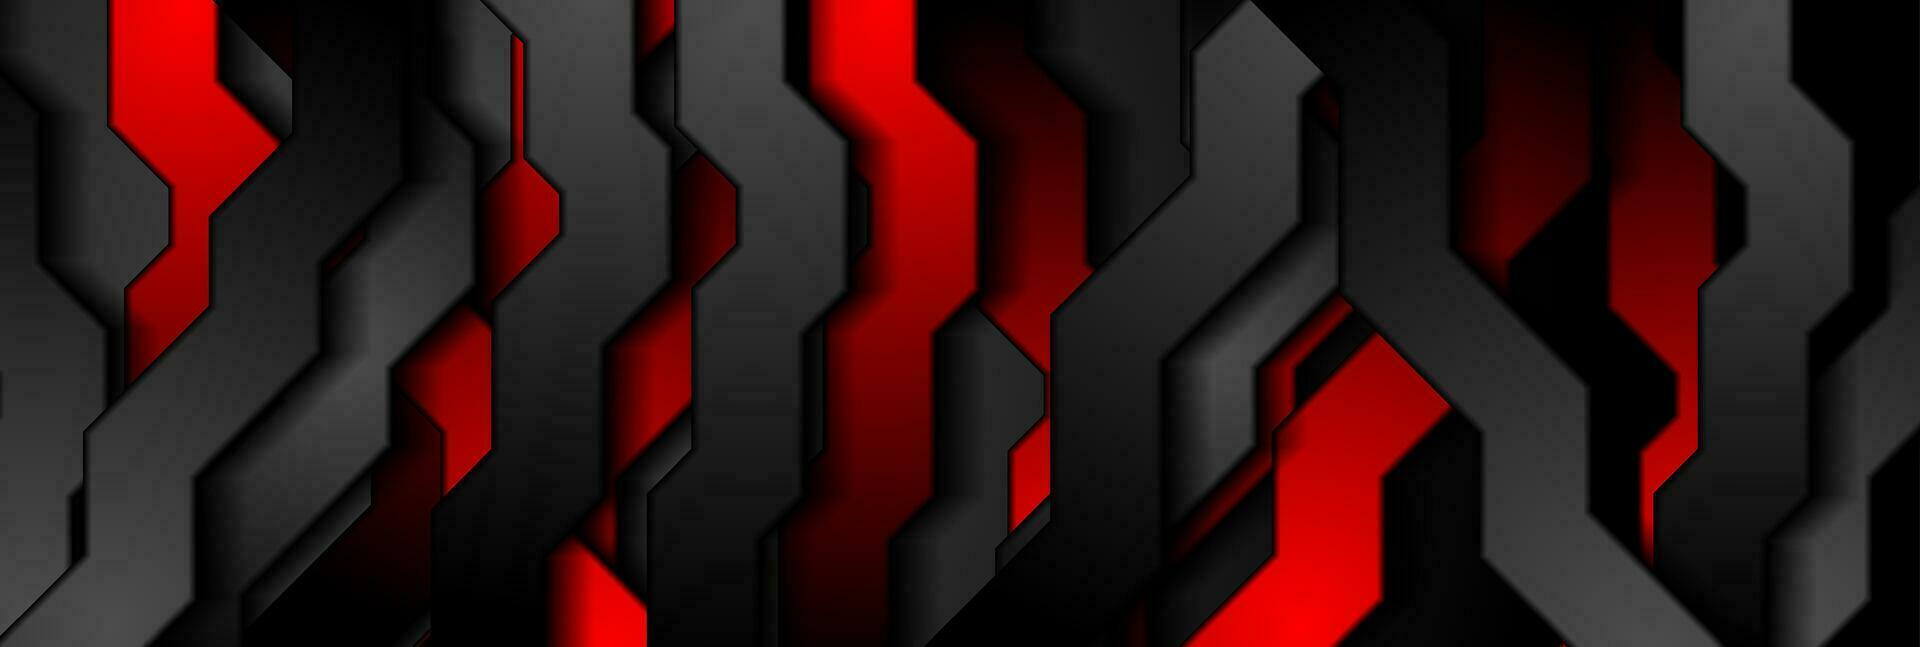 Red and black abstract technology background vector